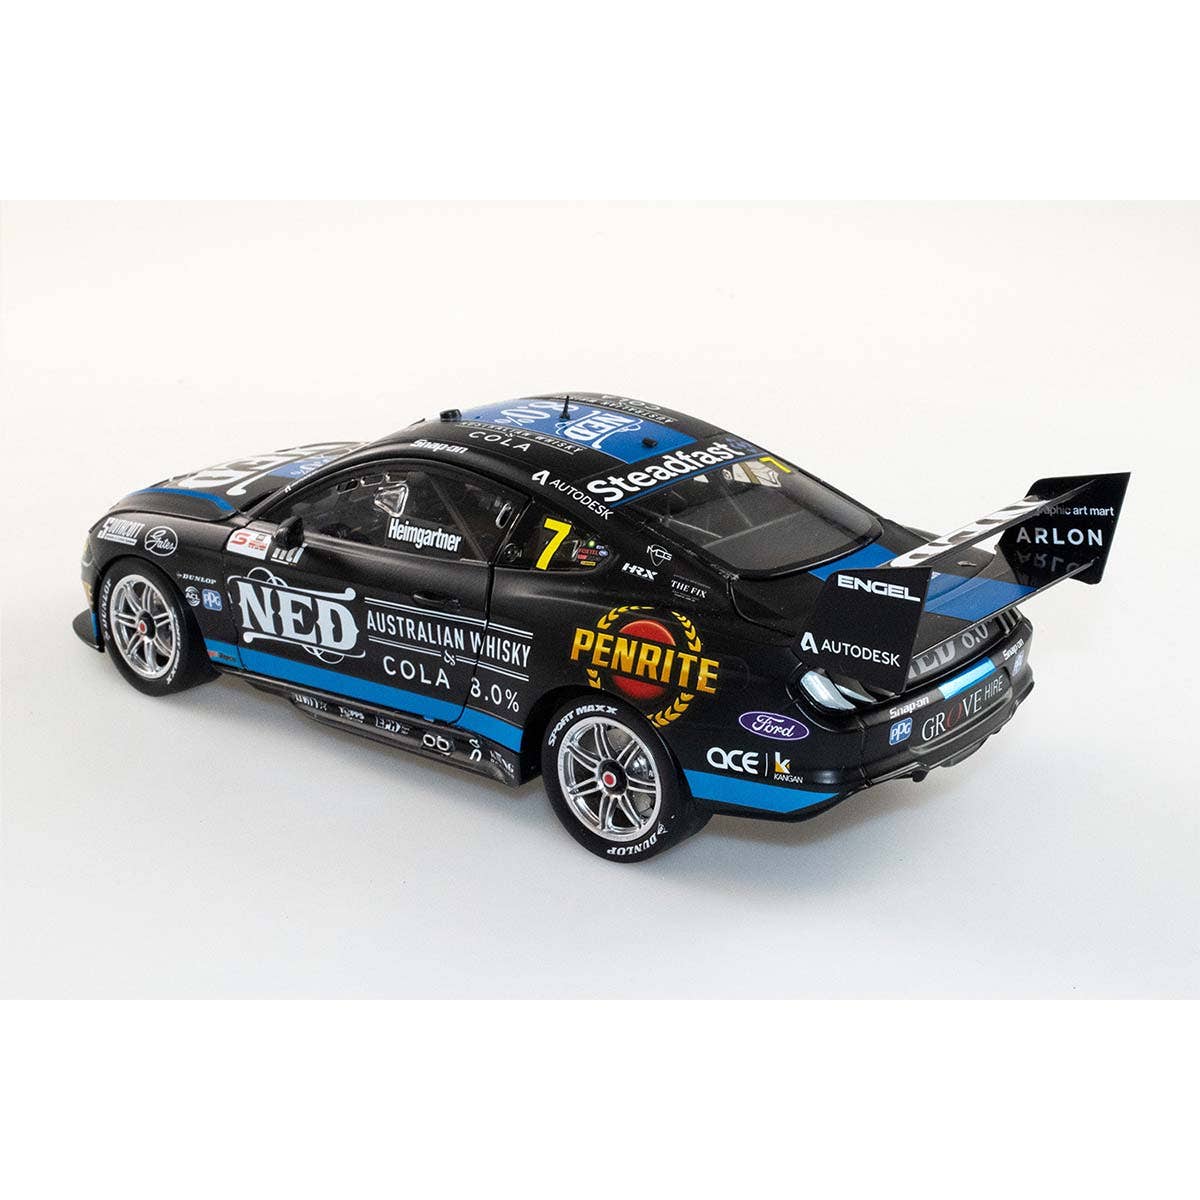 FORD GT MUSTANG V8 SUPERCAR NED RACING - ANDRE HEIMGARTNER #7 - NTI Townsville 500 - 1:18 Scale Diecast Model Car